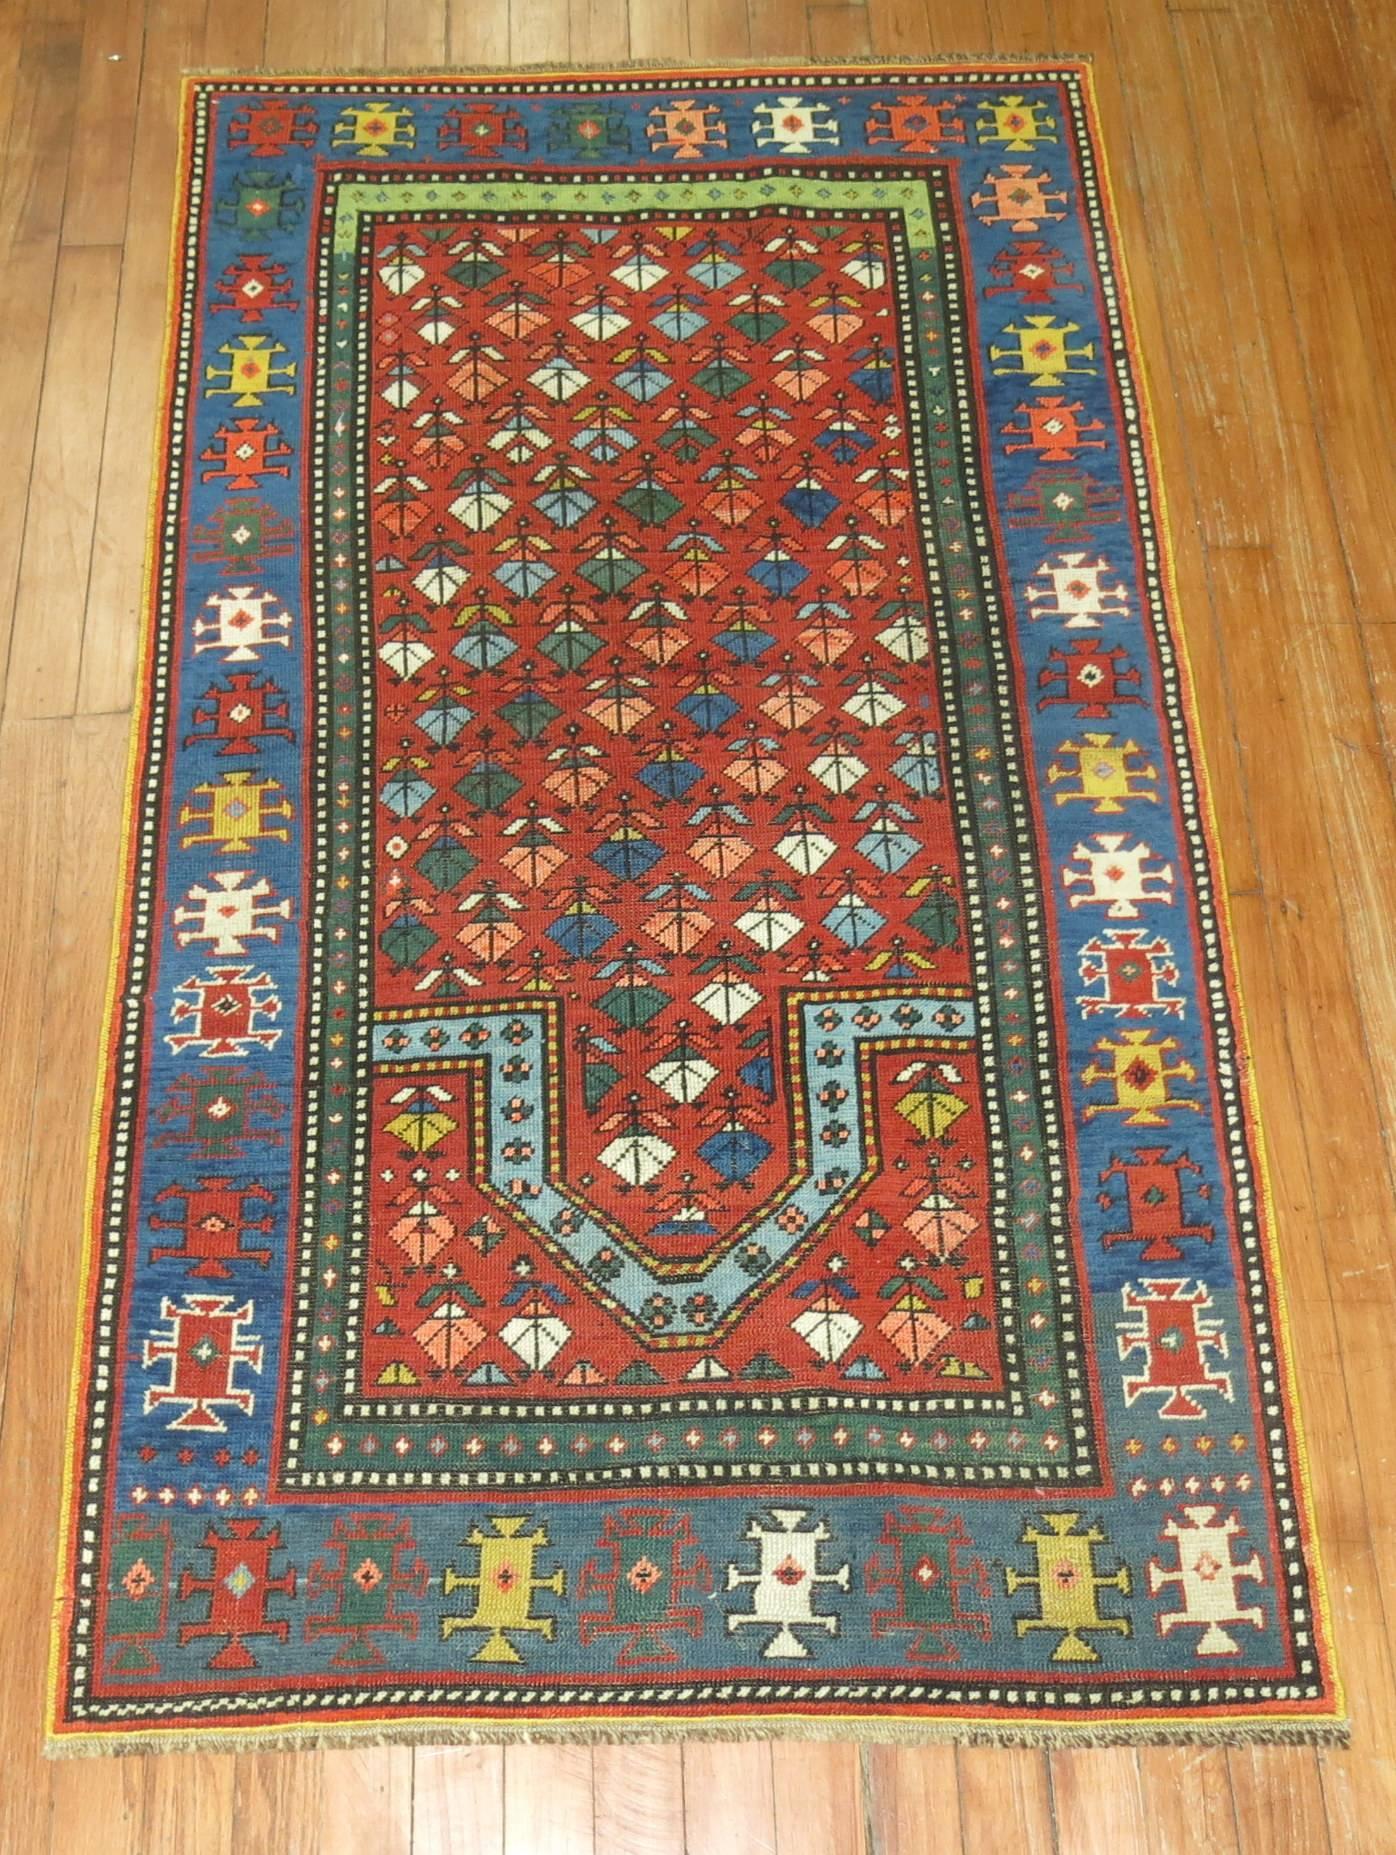 An early 20th century colorful Kazak prayer design rug.

2'9'' x 4'11''

The best antique Kazak rugs are long prized by connoisseurs of Caucasian rugs. Main reason for this is their incredibly saturated naturally dyed color tones that account for